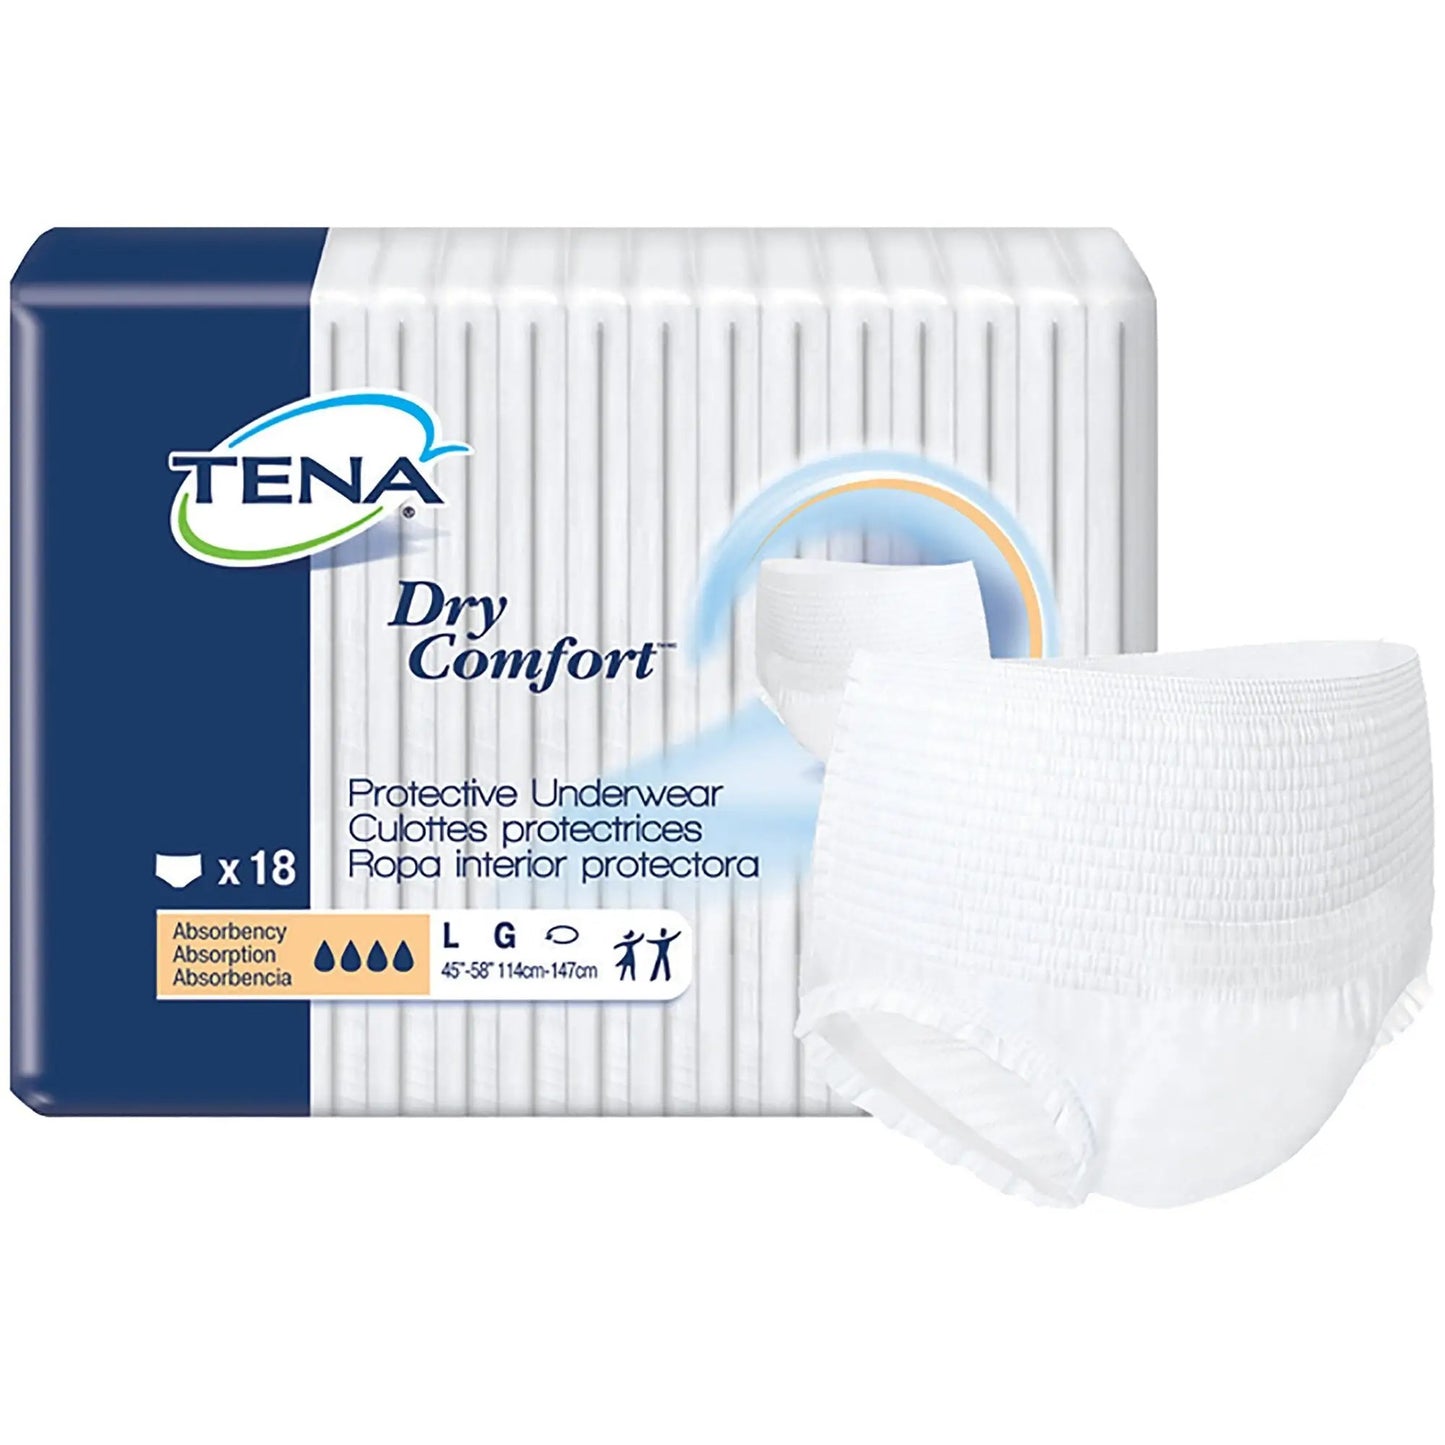 Tena Dry Comfort Absorbent Unisex Adult Disposable Moderate Underwear